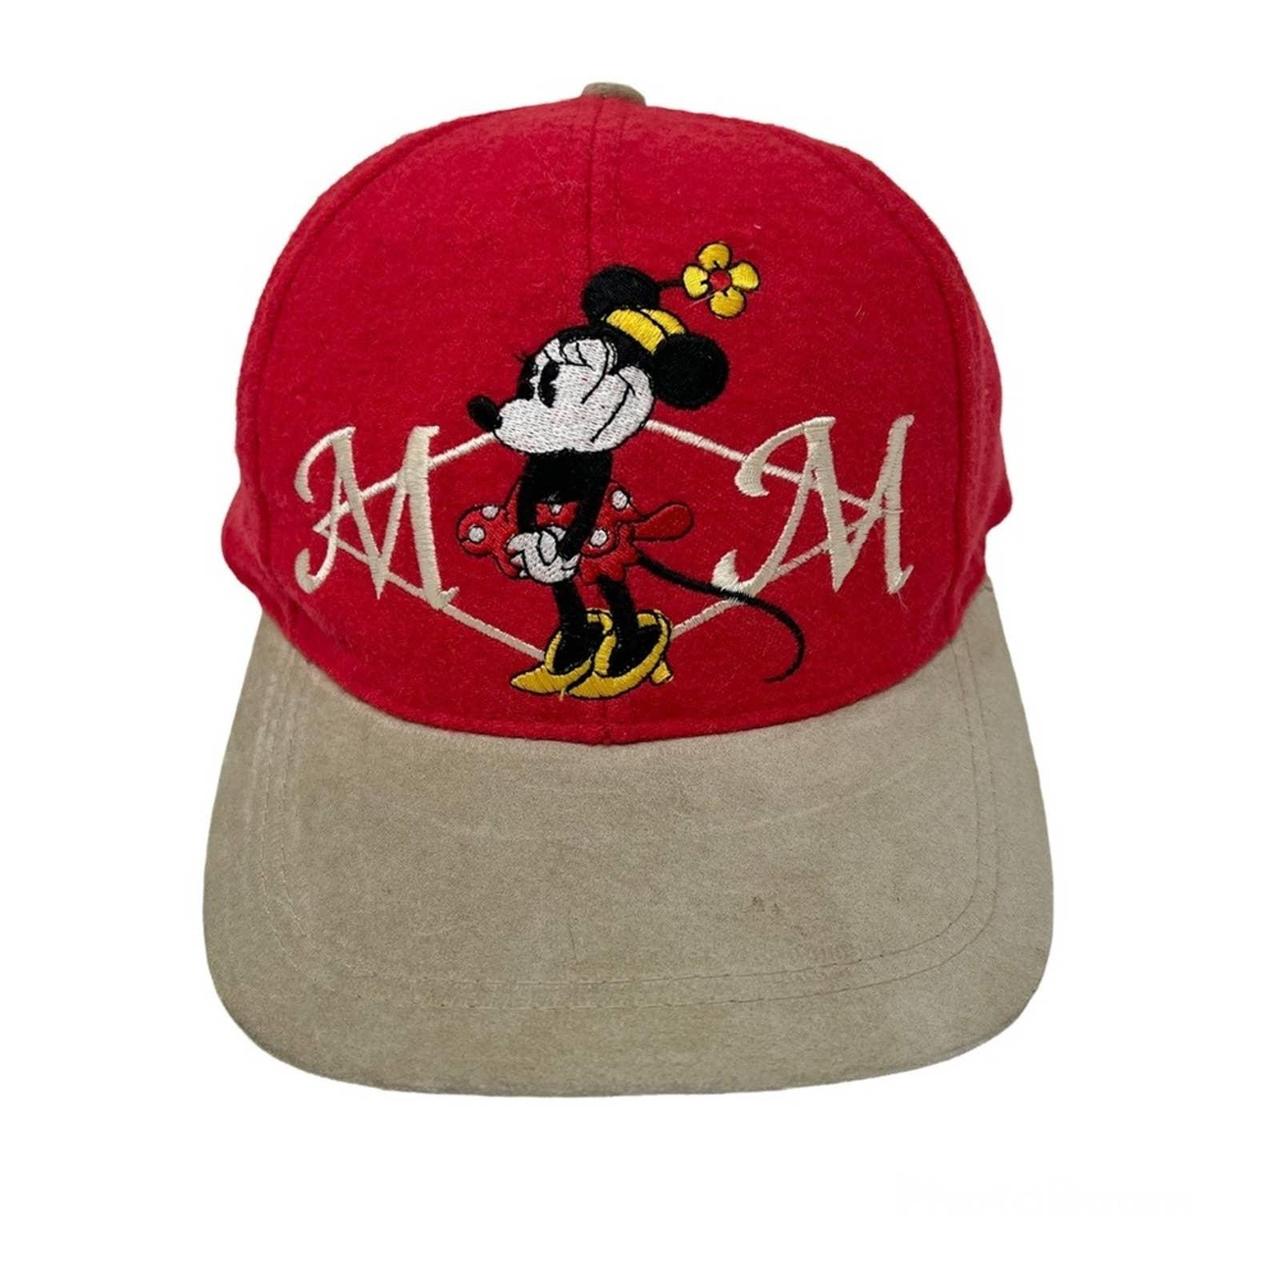 Disney Women's Red and Tan Hat